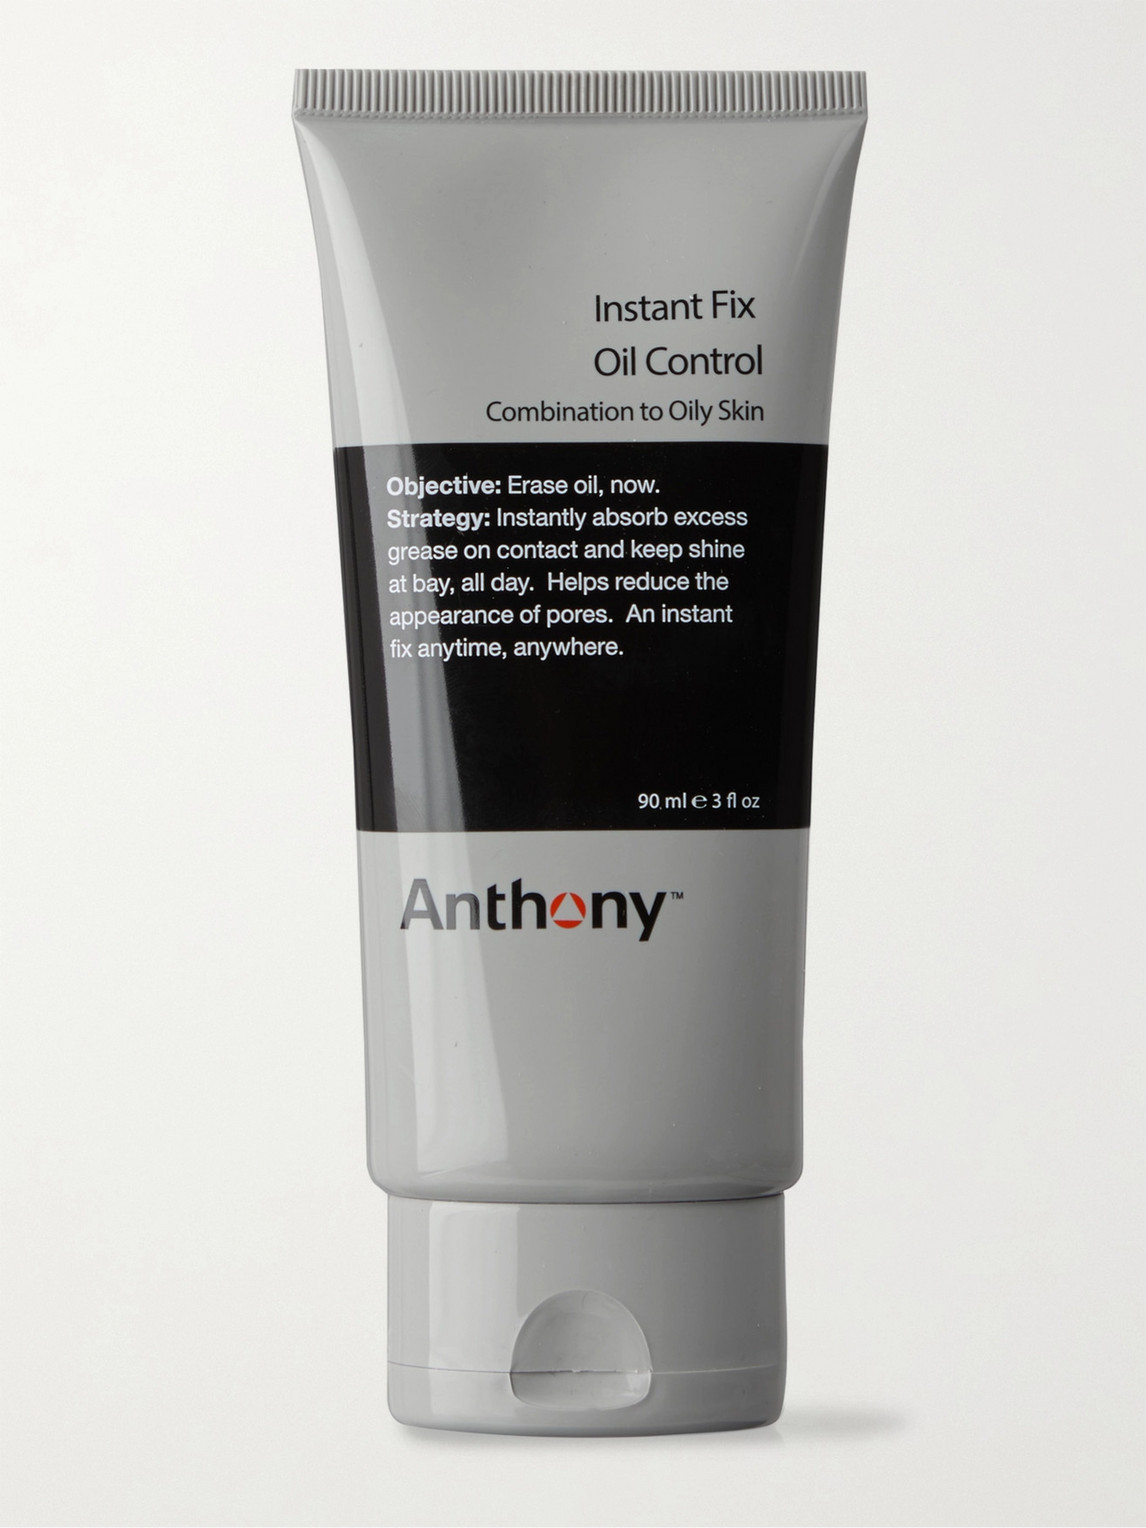 ANTHONY INSTANT FIX OIL CONTROL, 90ML